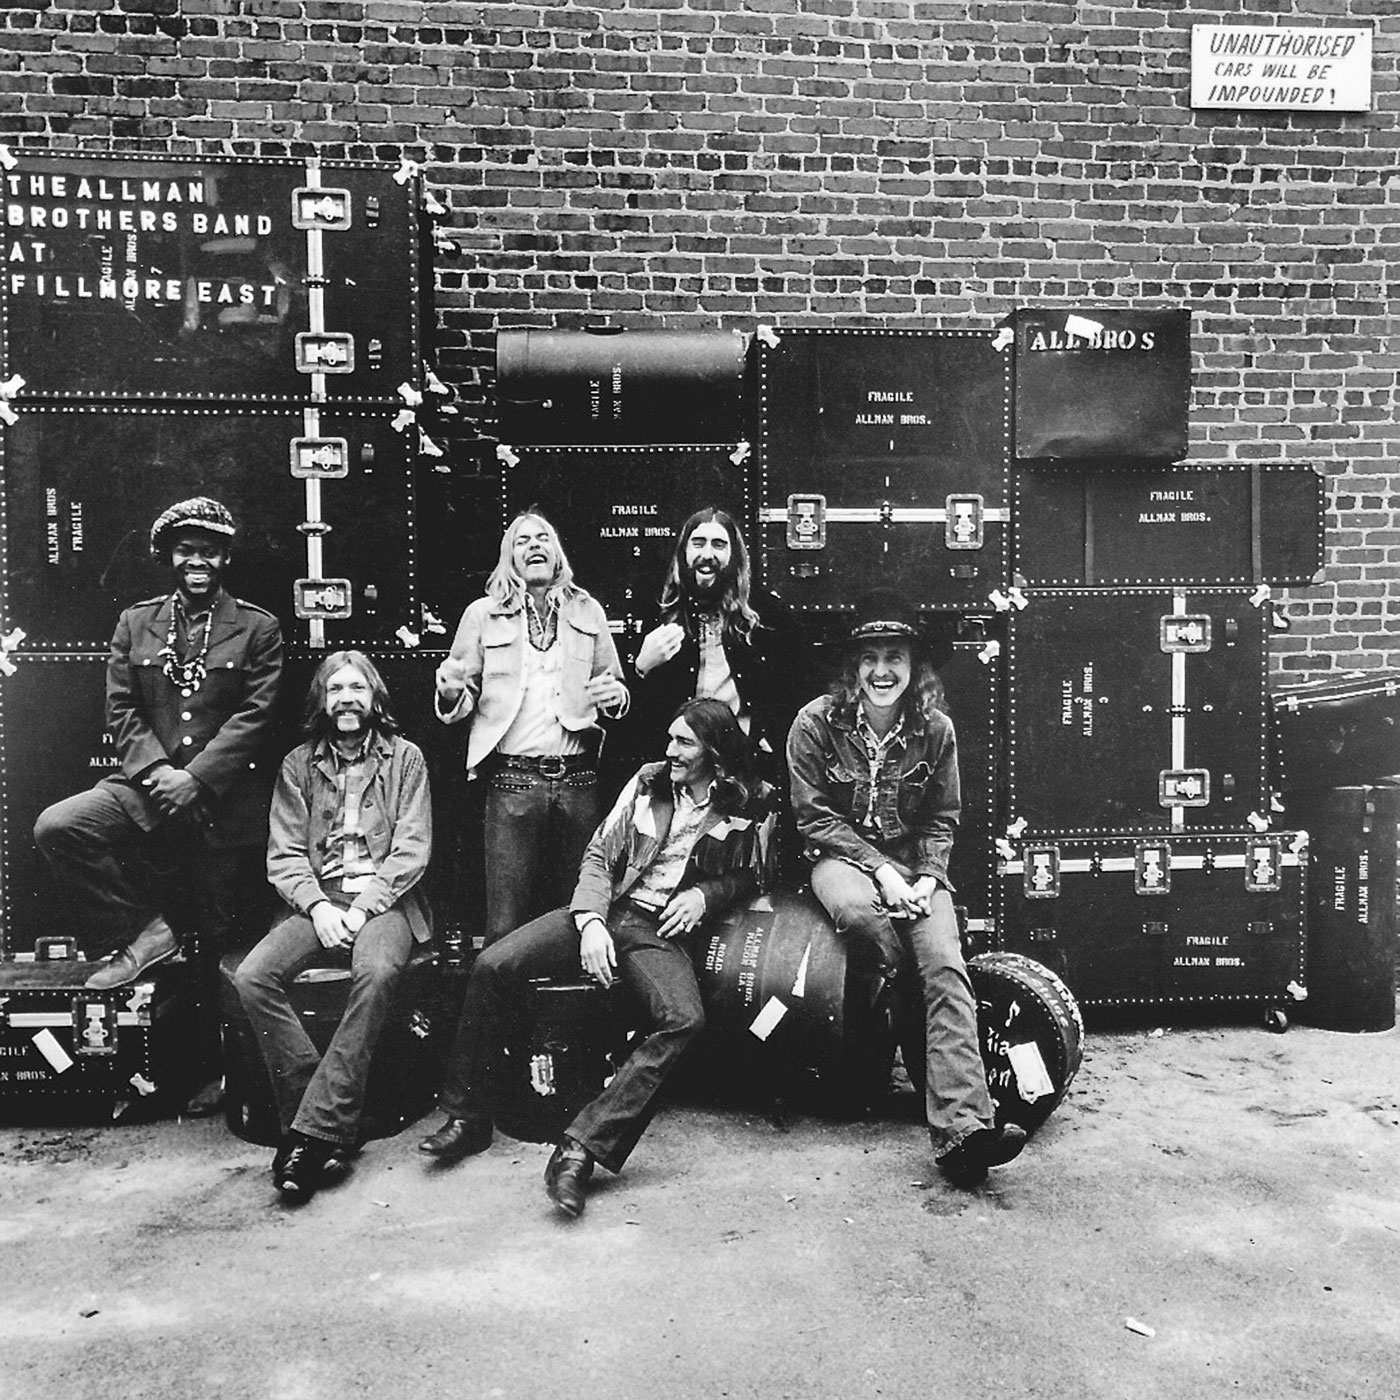 214 The Allman Brothers Band – At Fillmore East